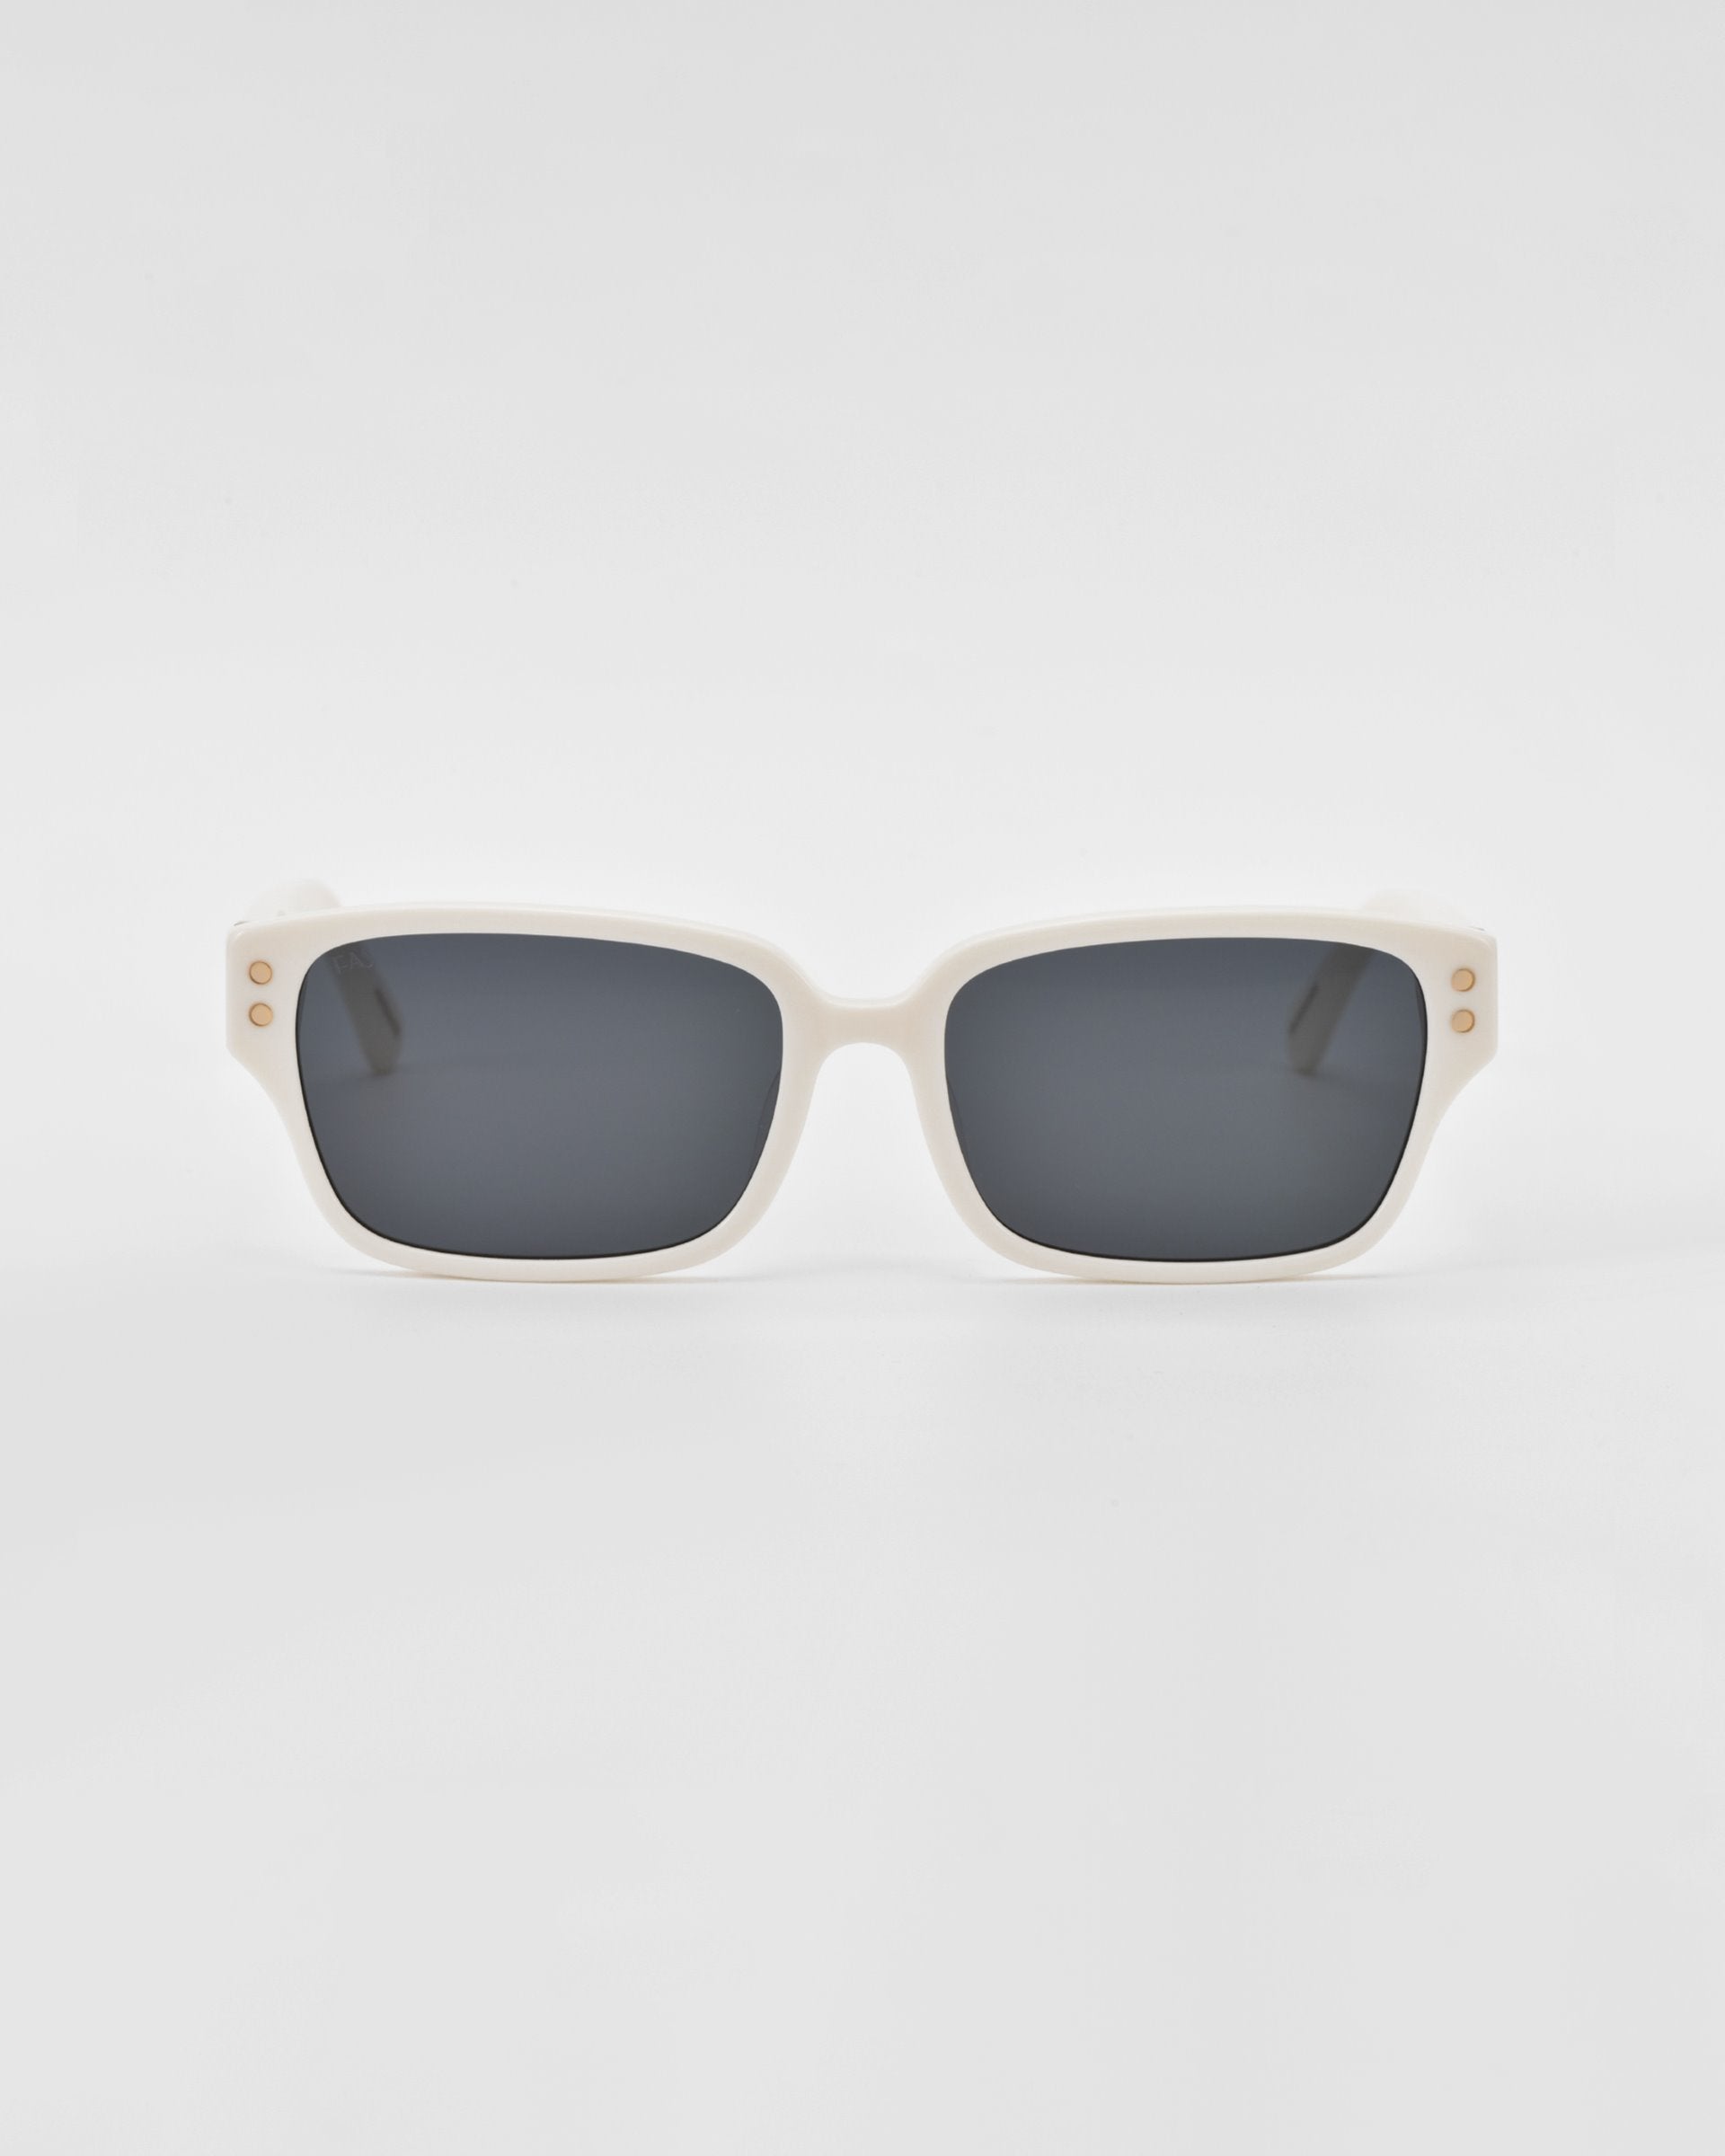 A pair of For Art&#39;s Sake® Zenith sunglasses with rectangular, white handcrafted acetate frames and dark lenses. The frames feature small, gold circular accents near the hinges on both sides. The background is plain and white, emphasizing the stylish design.